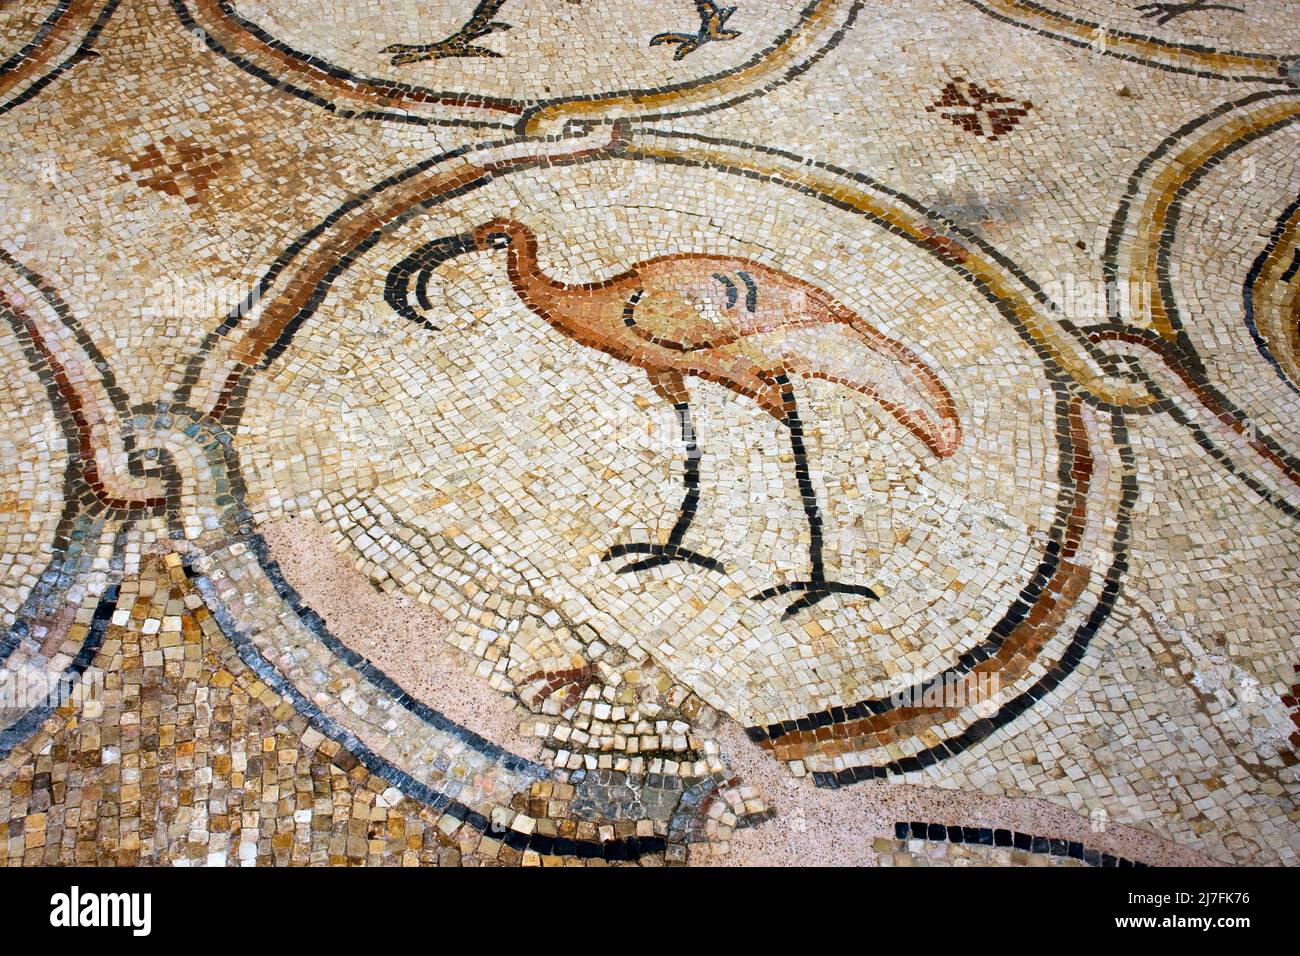 Israel, Coastal plains, Caesarea, The Palace of the ‘Birds Mosaic’ a 14.5 x 16m floor of a villa dating to the Byzantine period, 6-7th century CE Stock Photo